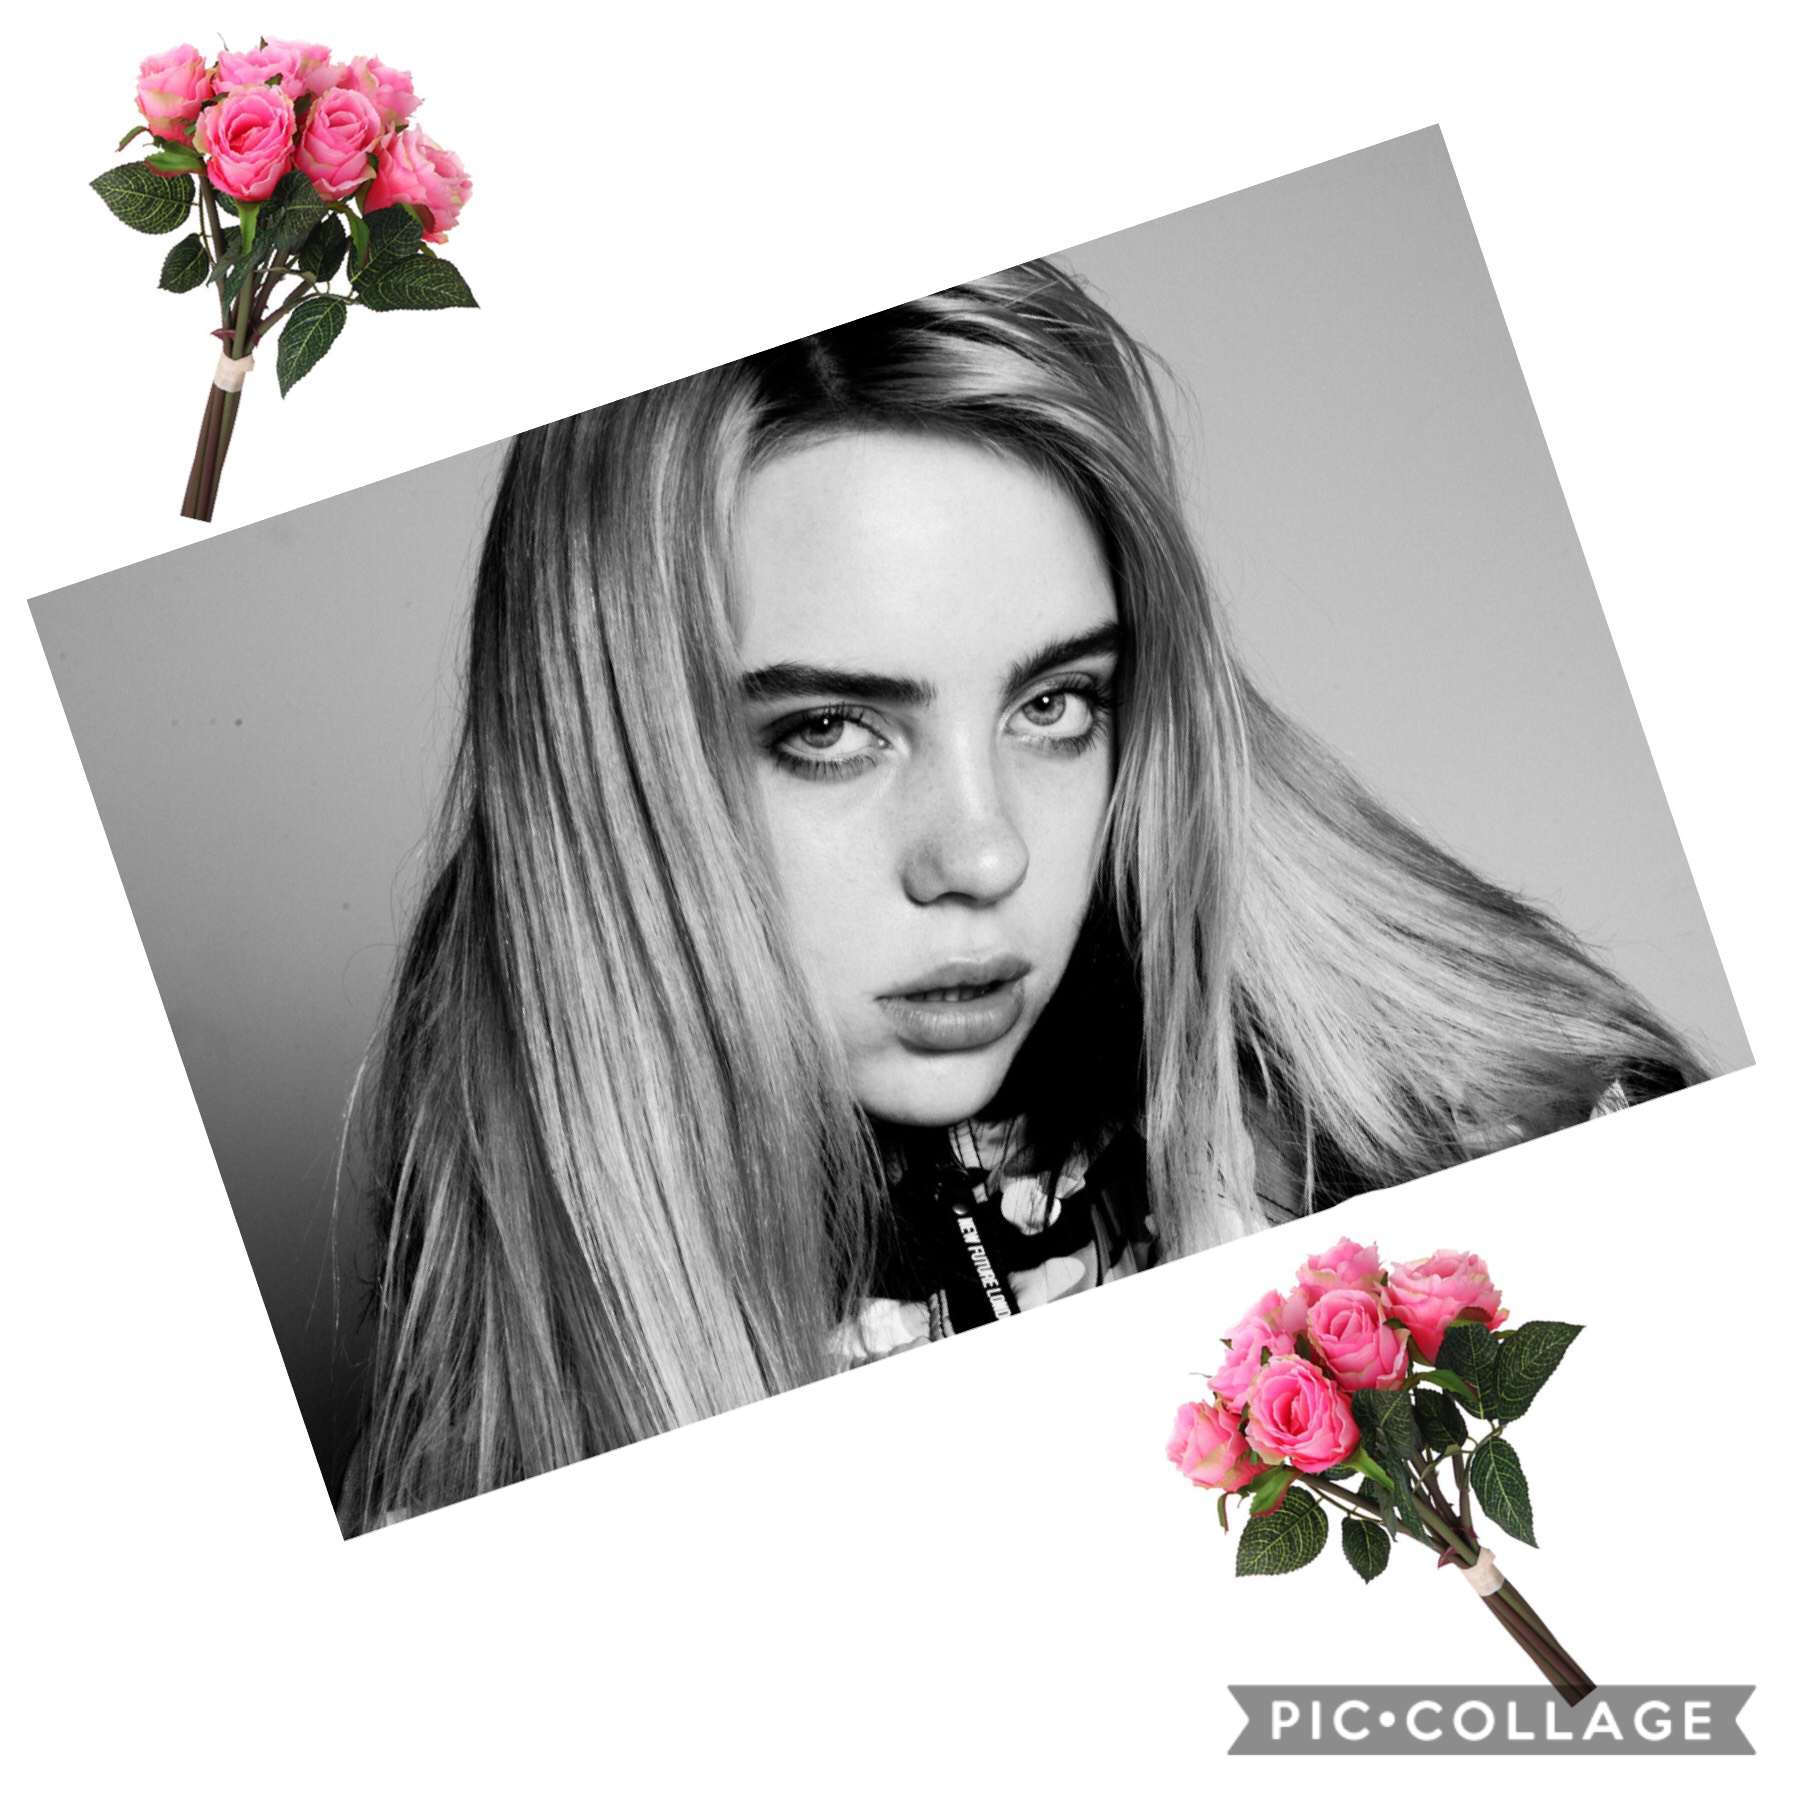 A lot of you like Billie so I did her